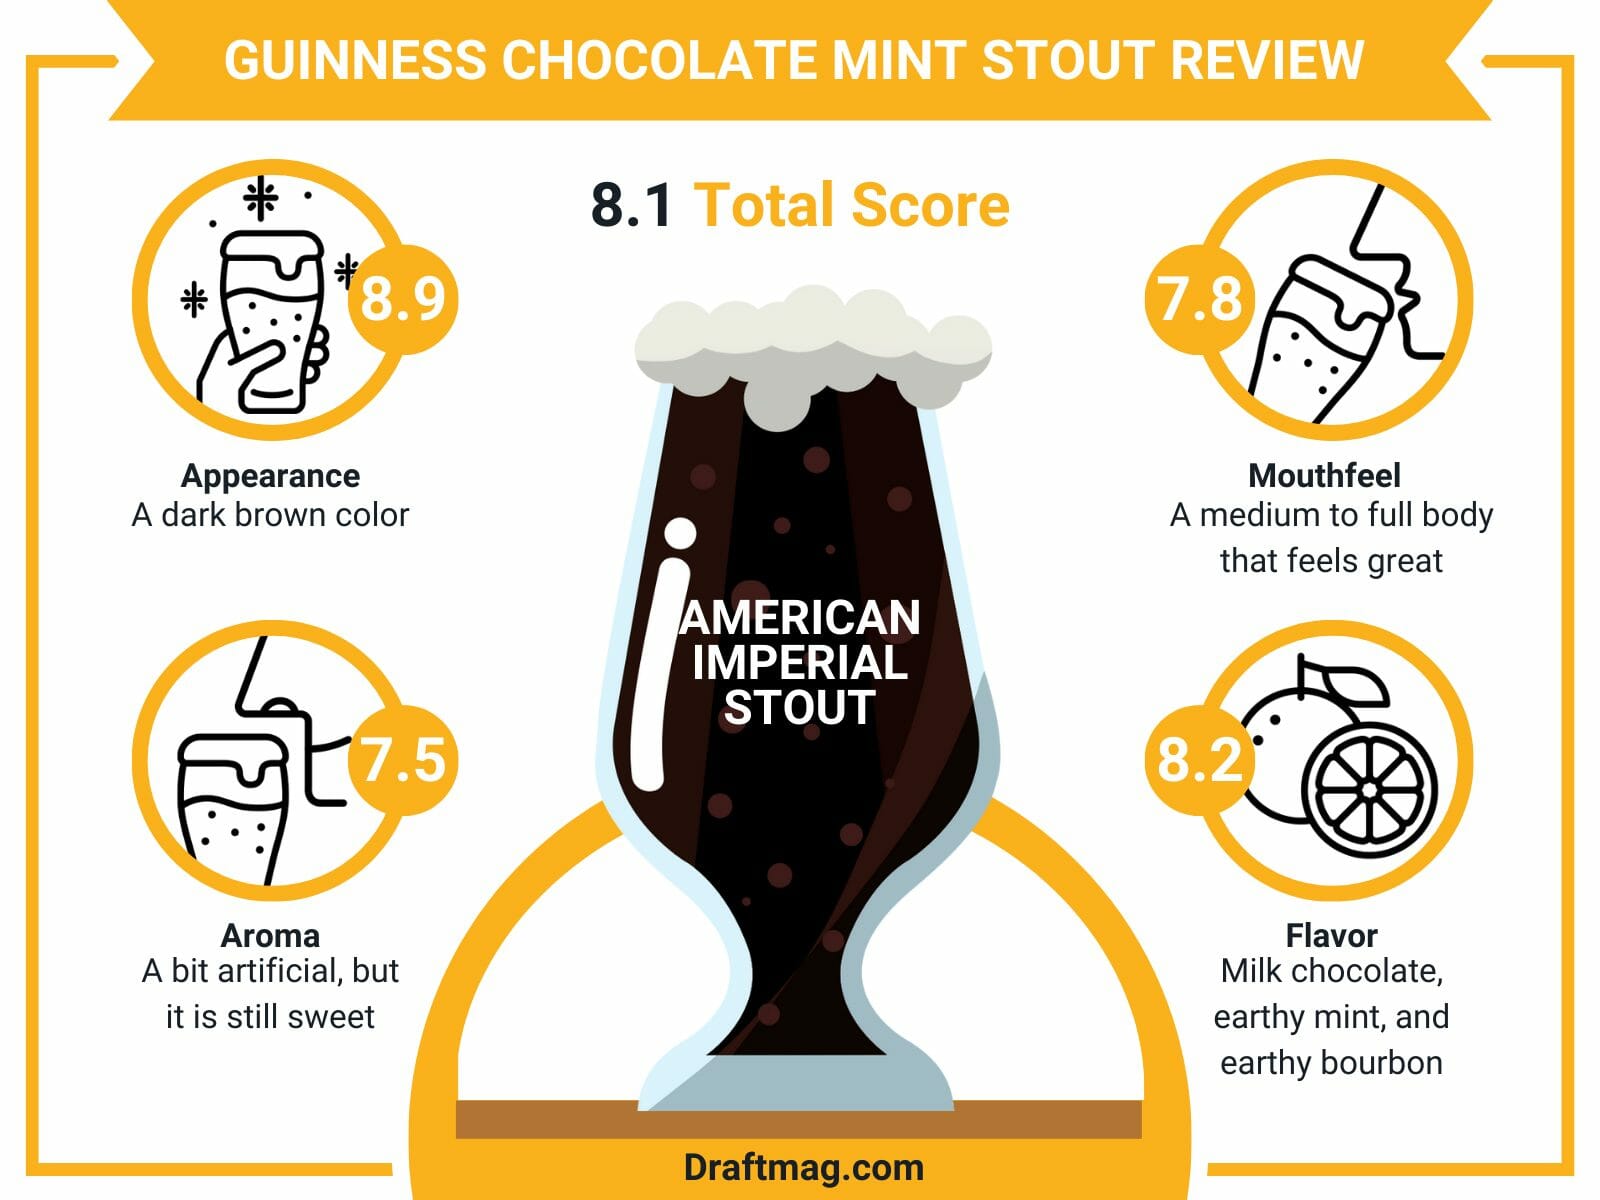 Guinness chocolate mint stout review infographic